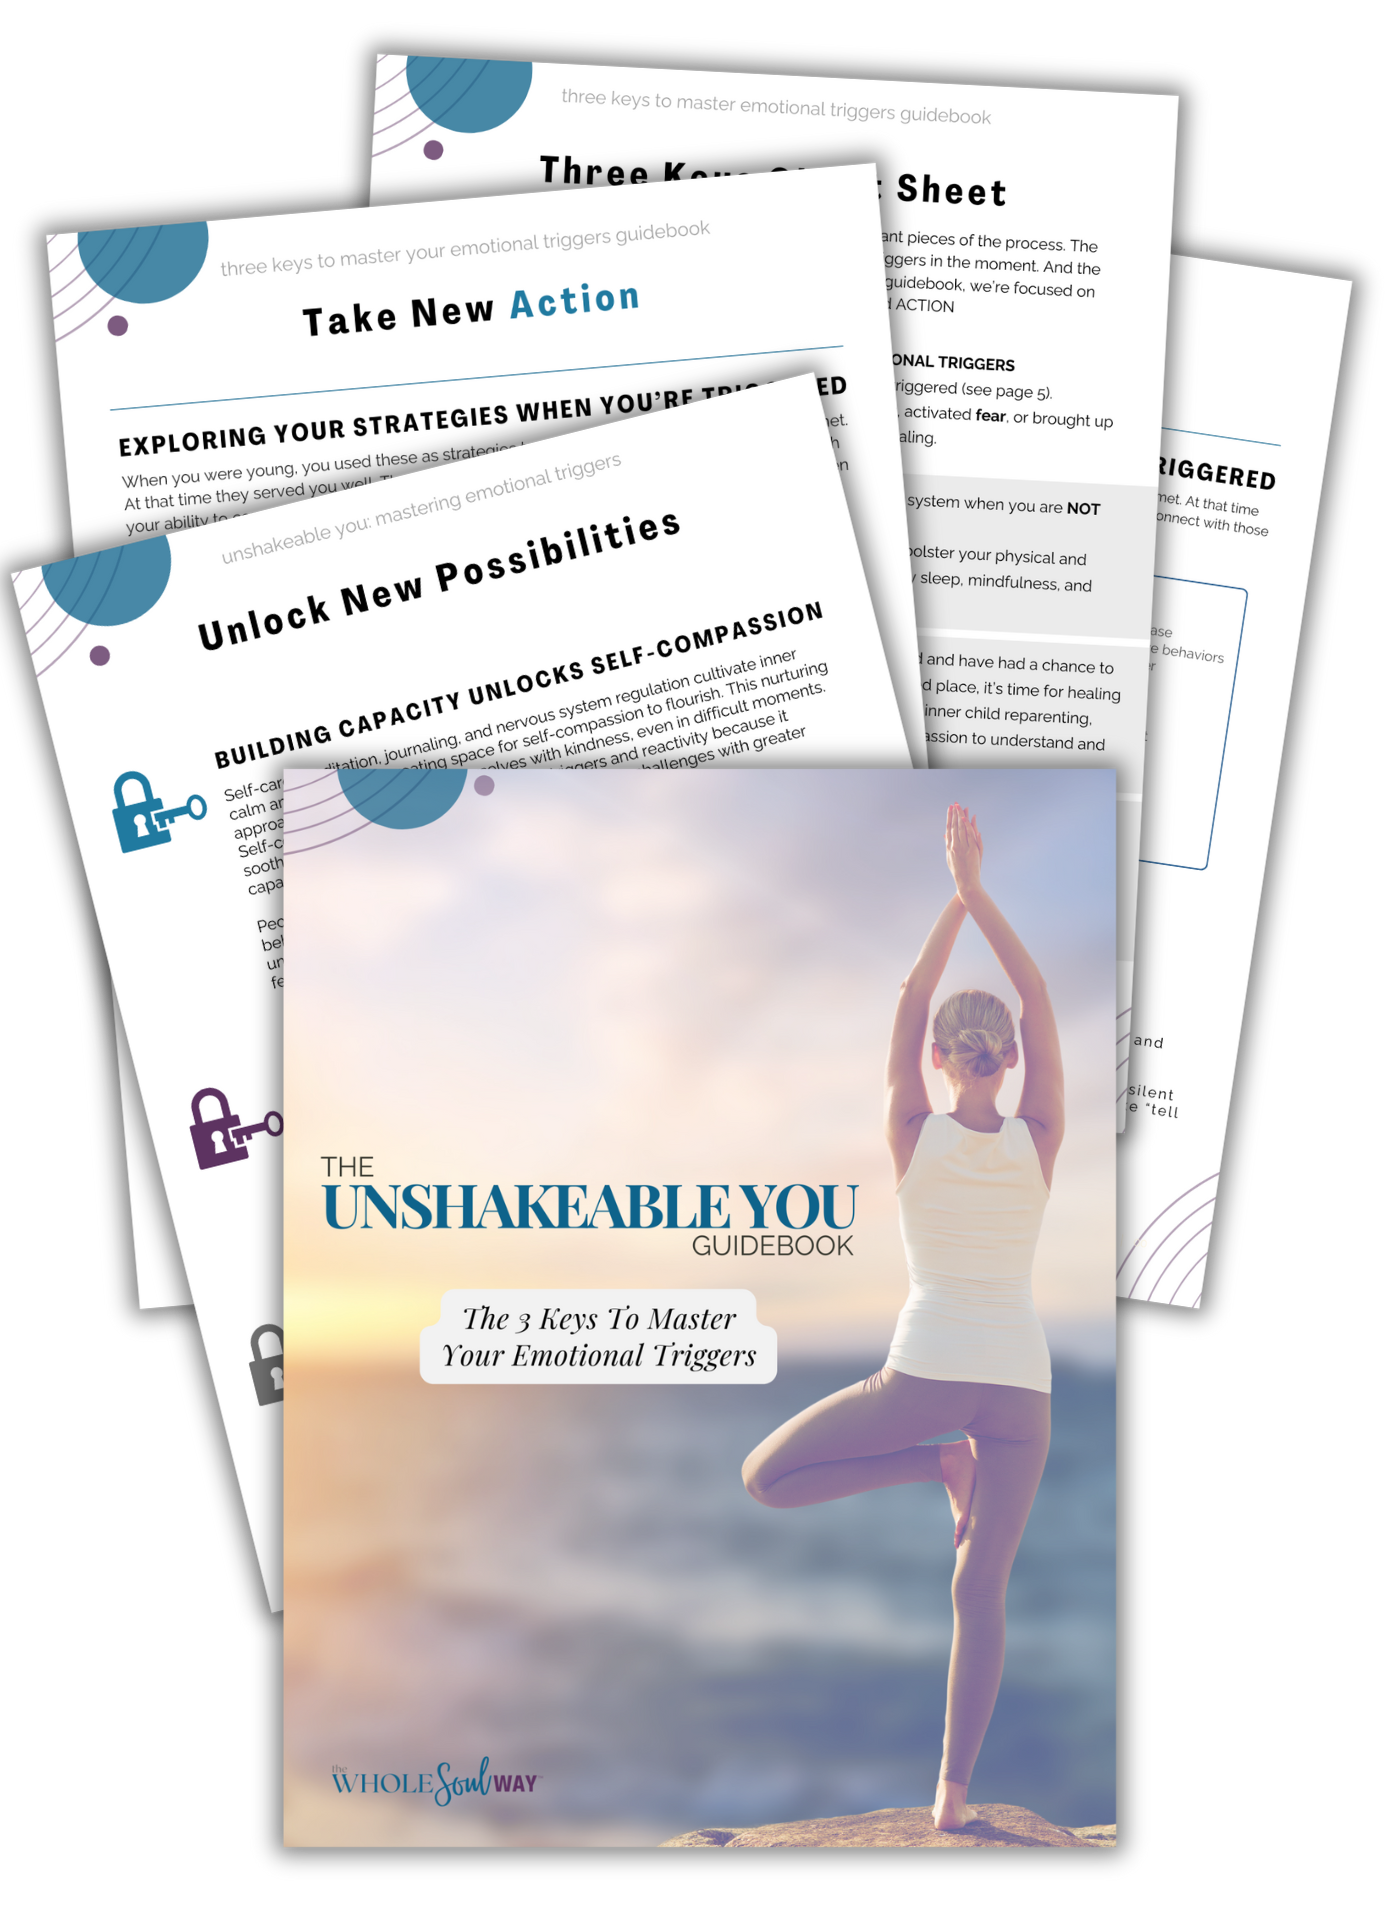 Unshakeable You 3 Keys to Master Emotional Triggers Mockup for Sales Page